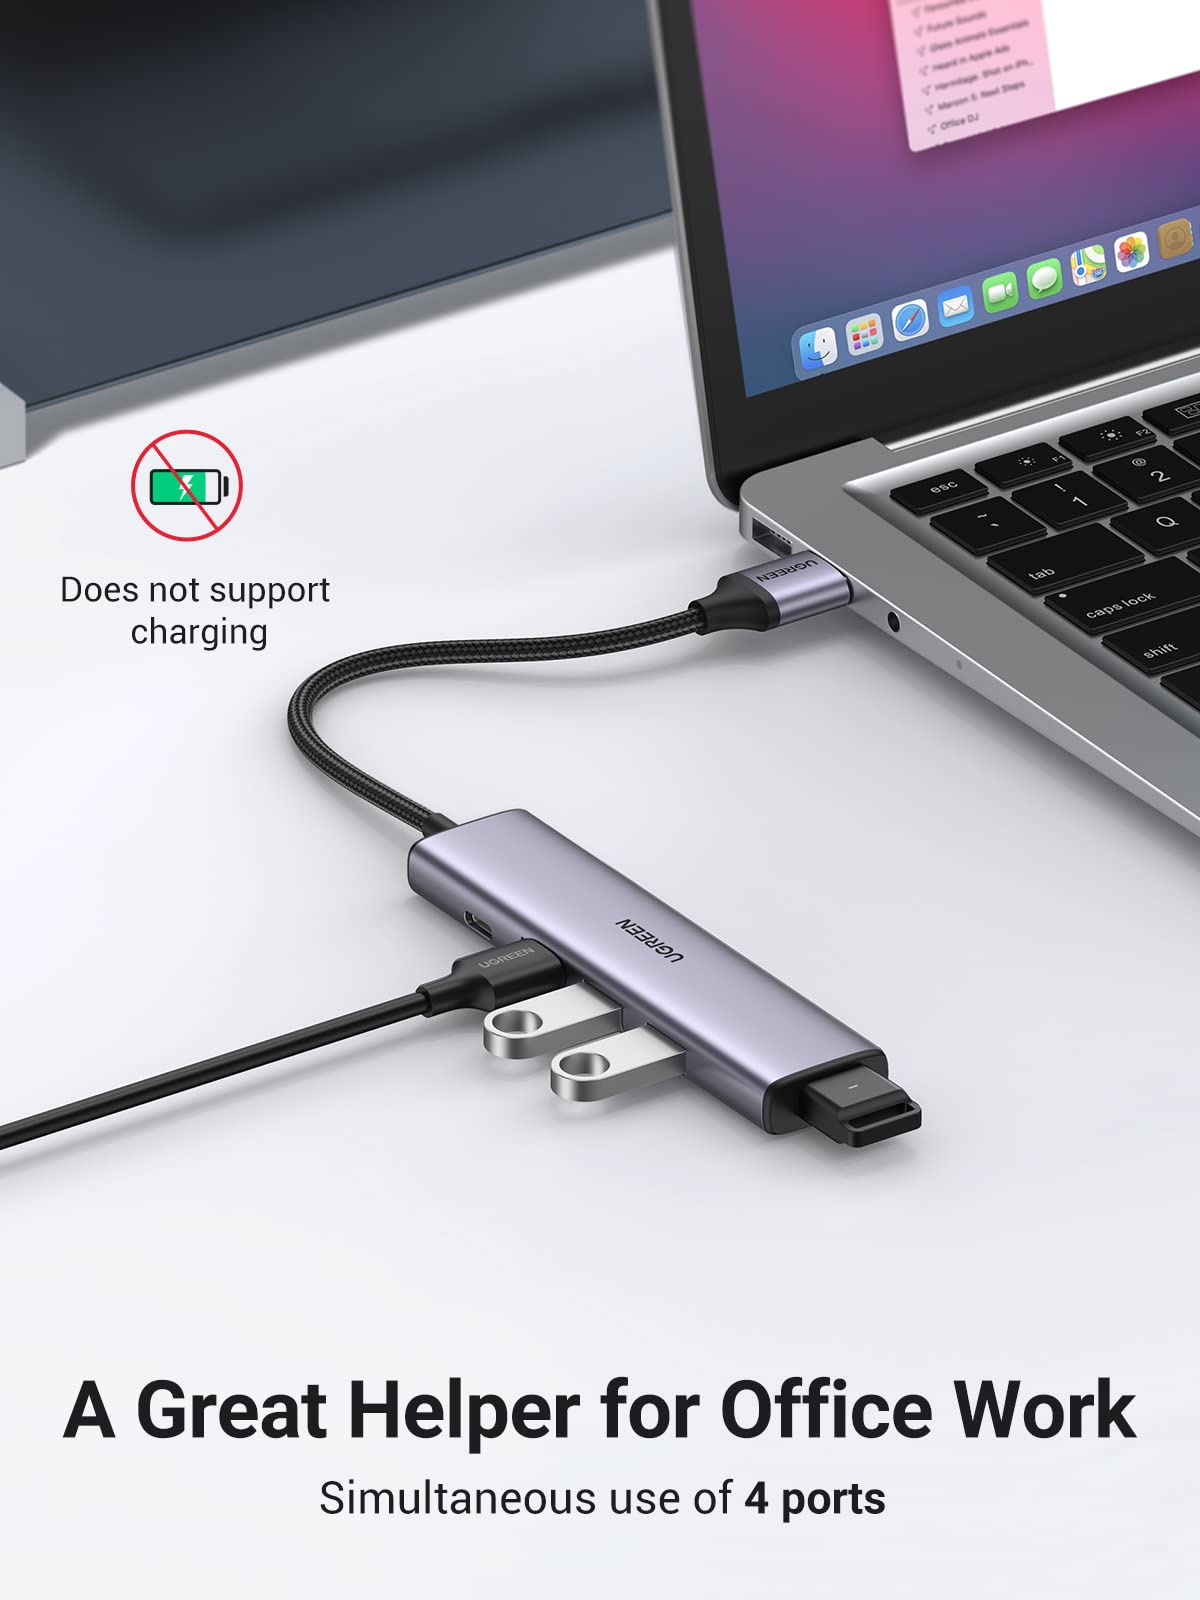 Ugreen UGREEN USB 3.0 Hub Micro USB OTG Adapter with 4 USB Ports for  Macbook air, Surface, Laptop, OTG Compatible Android Cell Phone and Tablet  20292 USB Hub Price in India - Buy Ugreen UGREEN USB 3.0 Hub Micro USB OTG  Adapter with 4